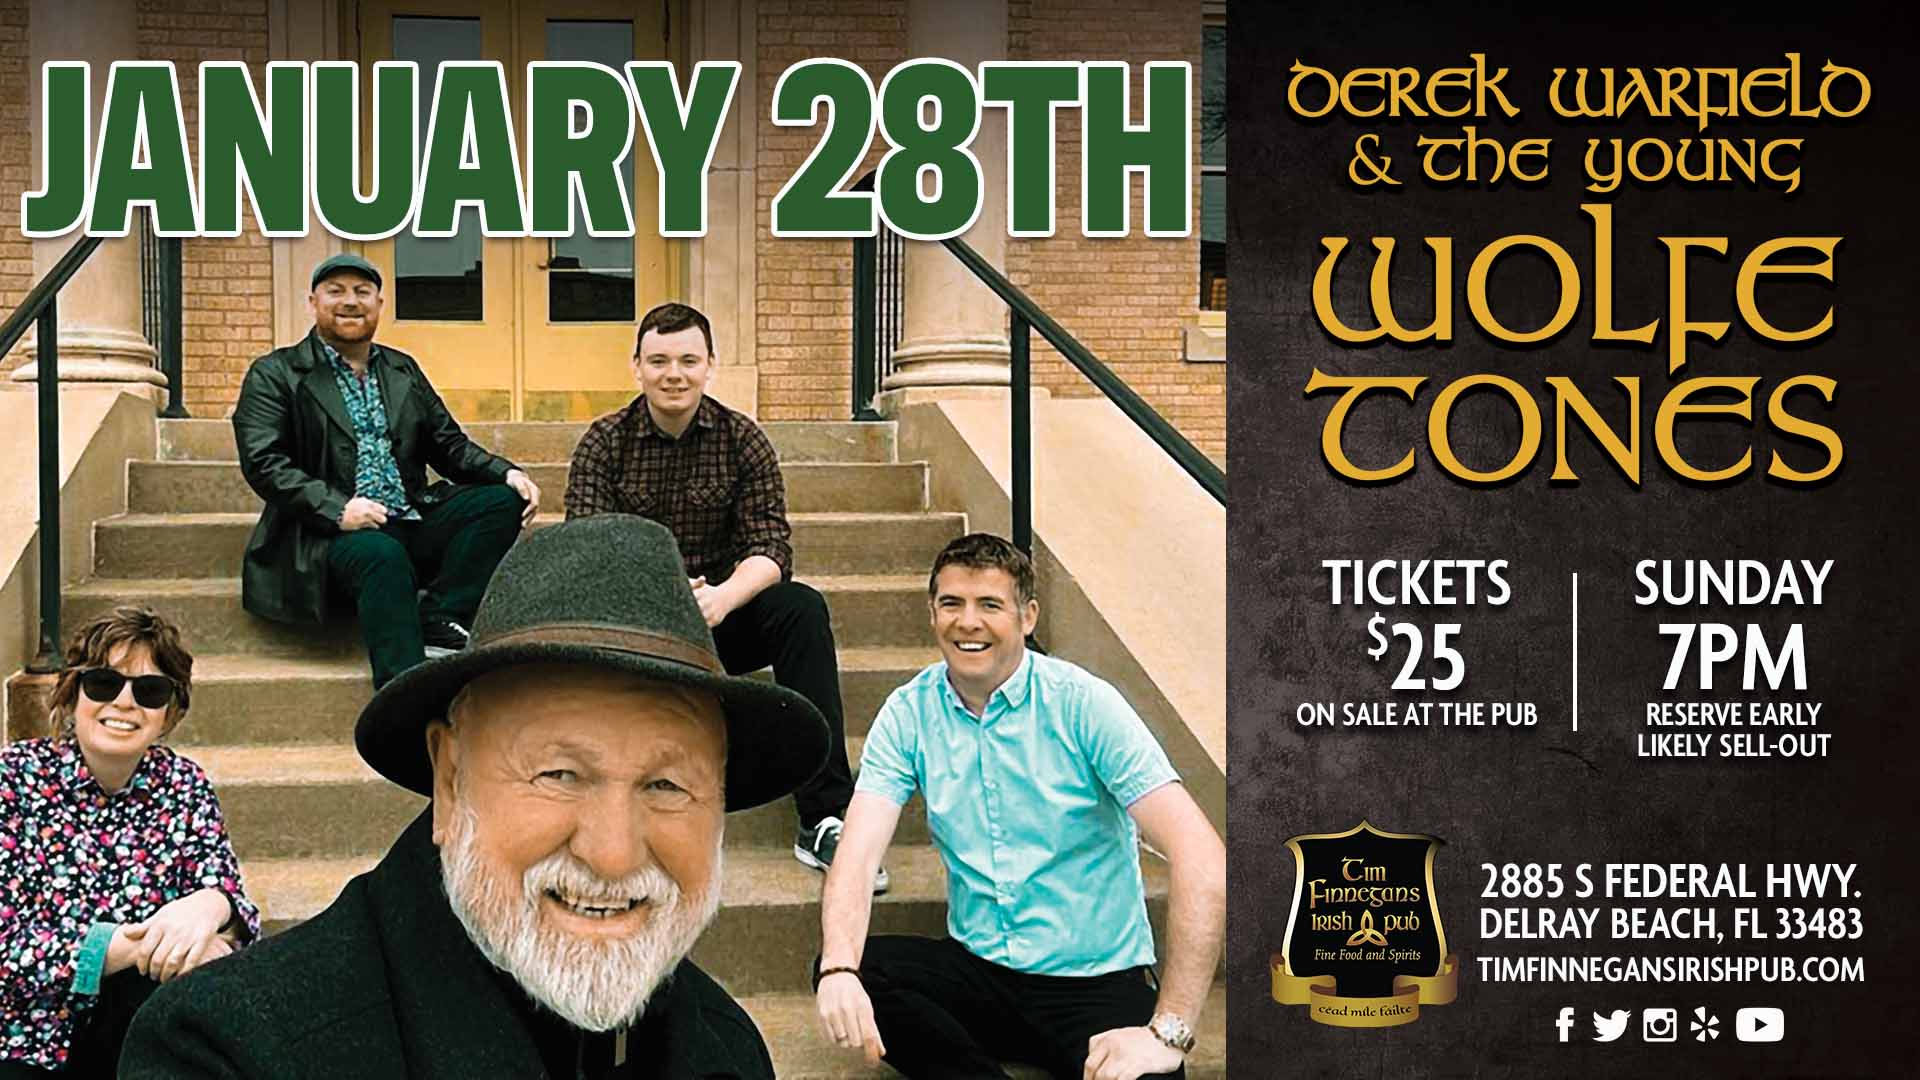 Derek Warfield and the Young Wolfe Tones January 28th 2024 - Tickets $25 - available at the pub